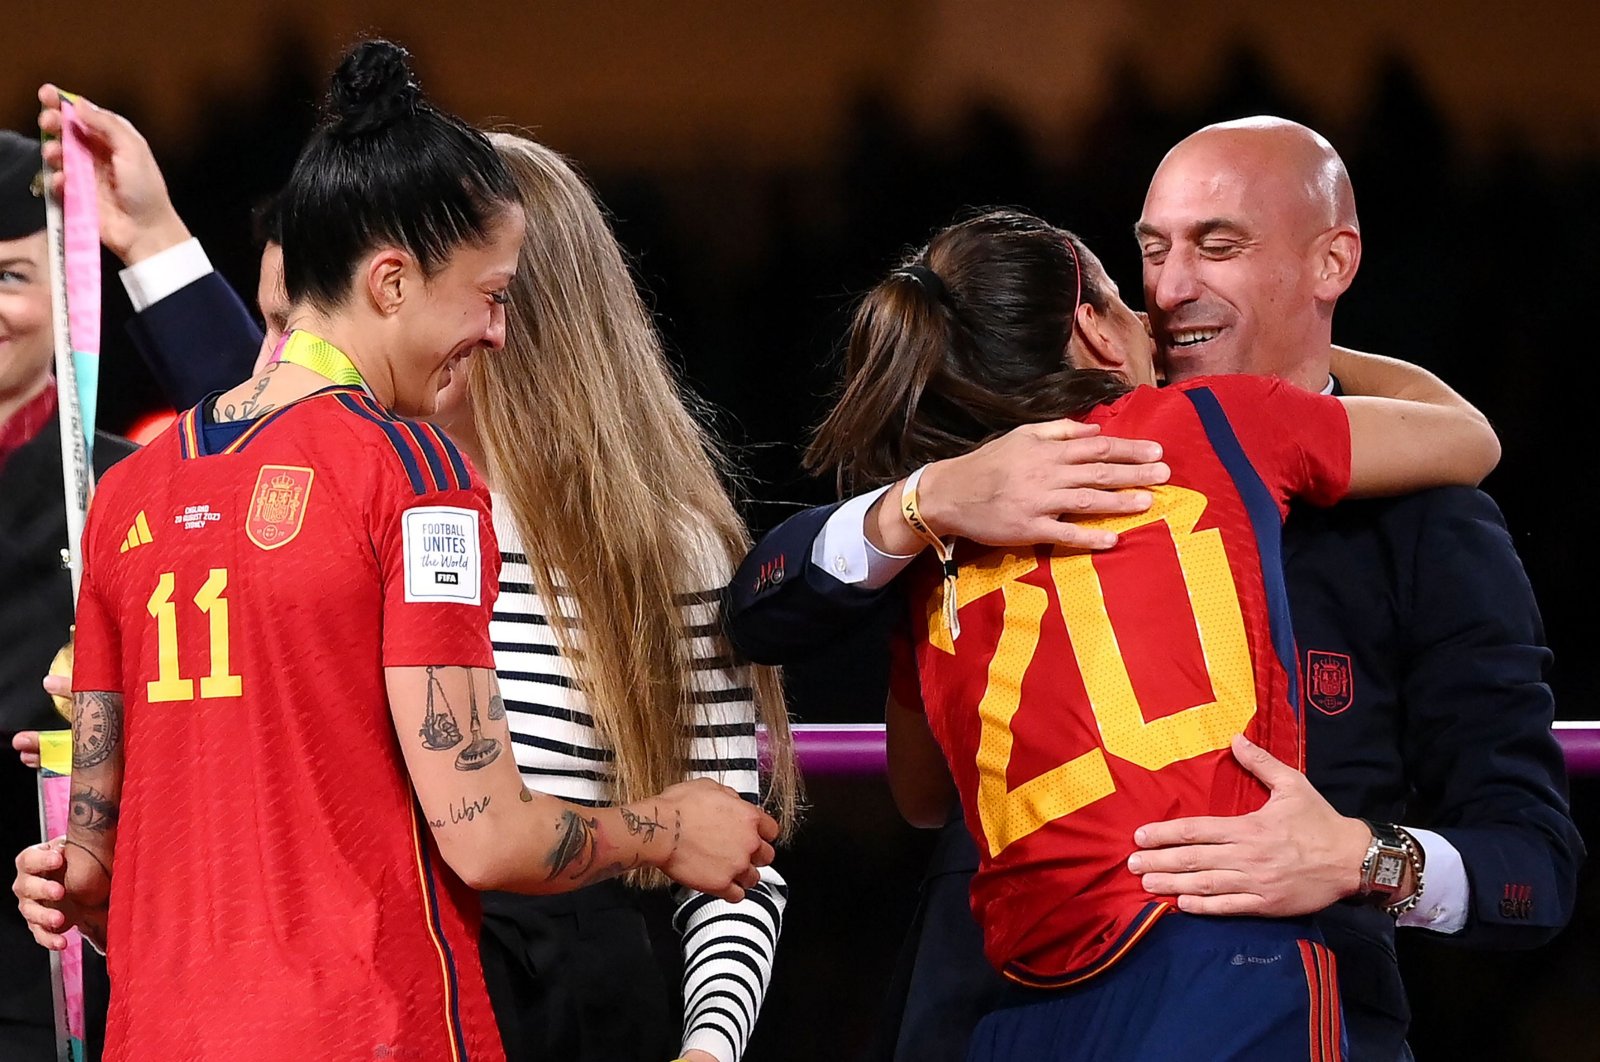 Spain&#039;s defender (2nd R) Rocio Galvez is congratulated by Royal Spanish Football Federation President Luis Rubiales (R) next to Jennifer Hermoso after winning the Women&#039;s World Cup final football match against England at Stadium Australia, Sydney, Australia, Aug. 20, 2023. (AFP Photo)